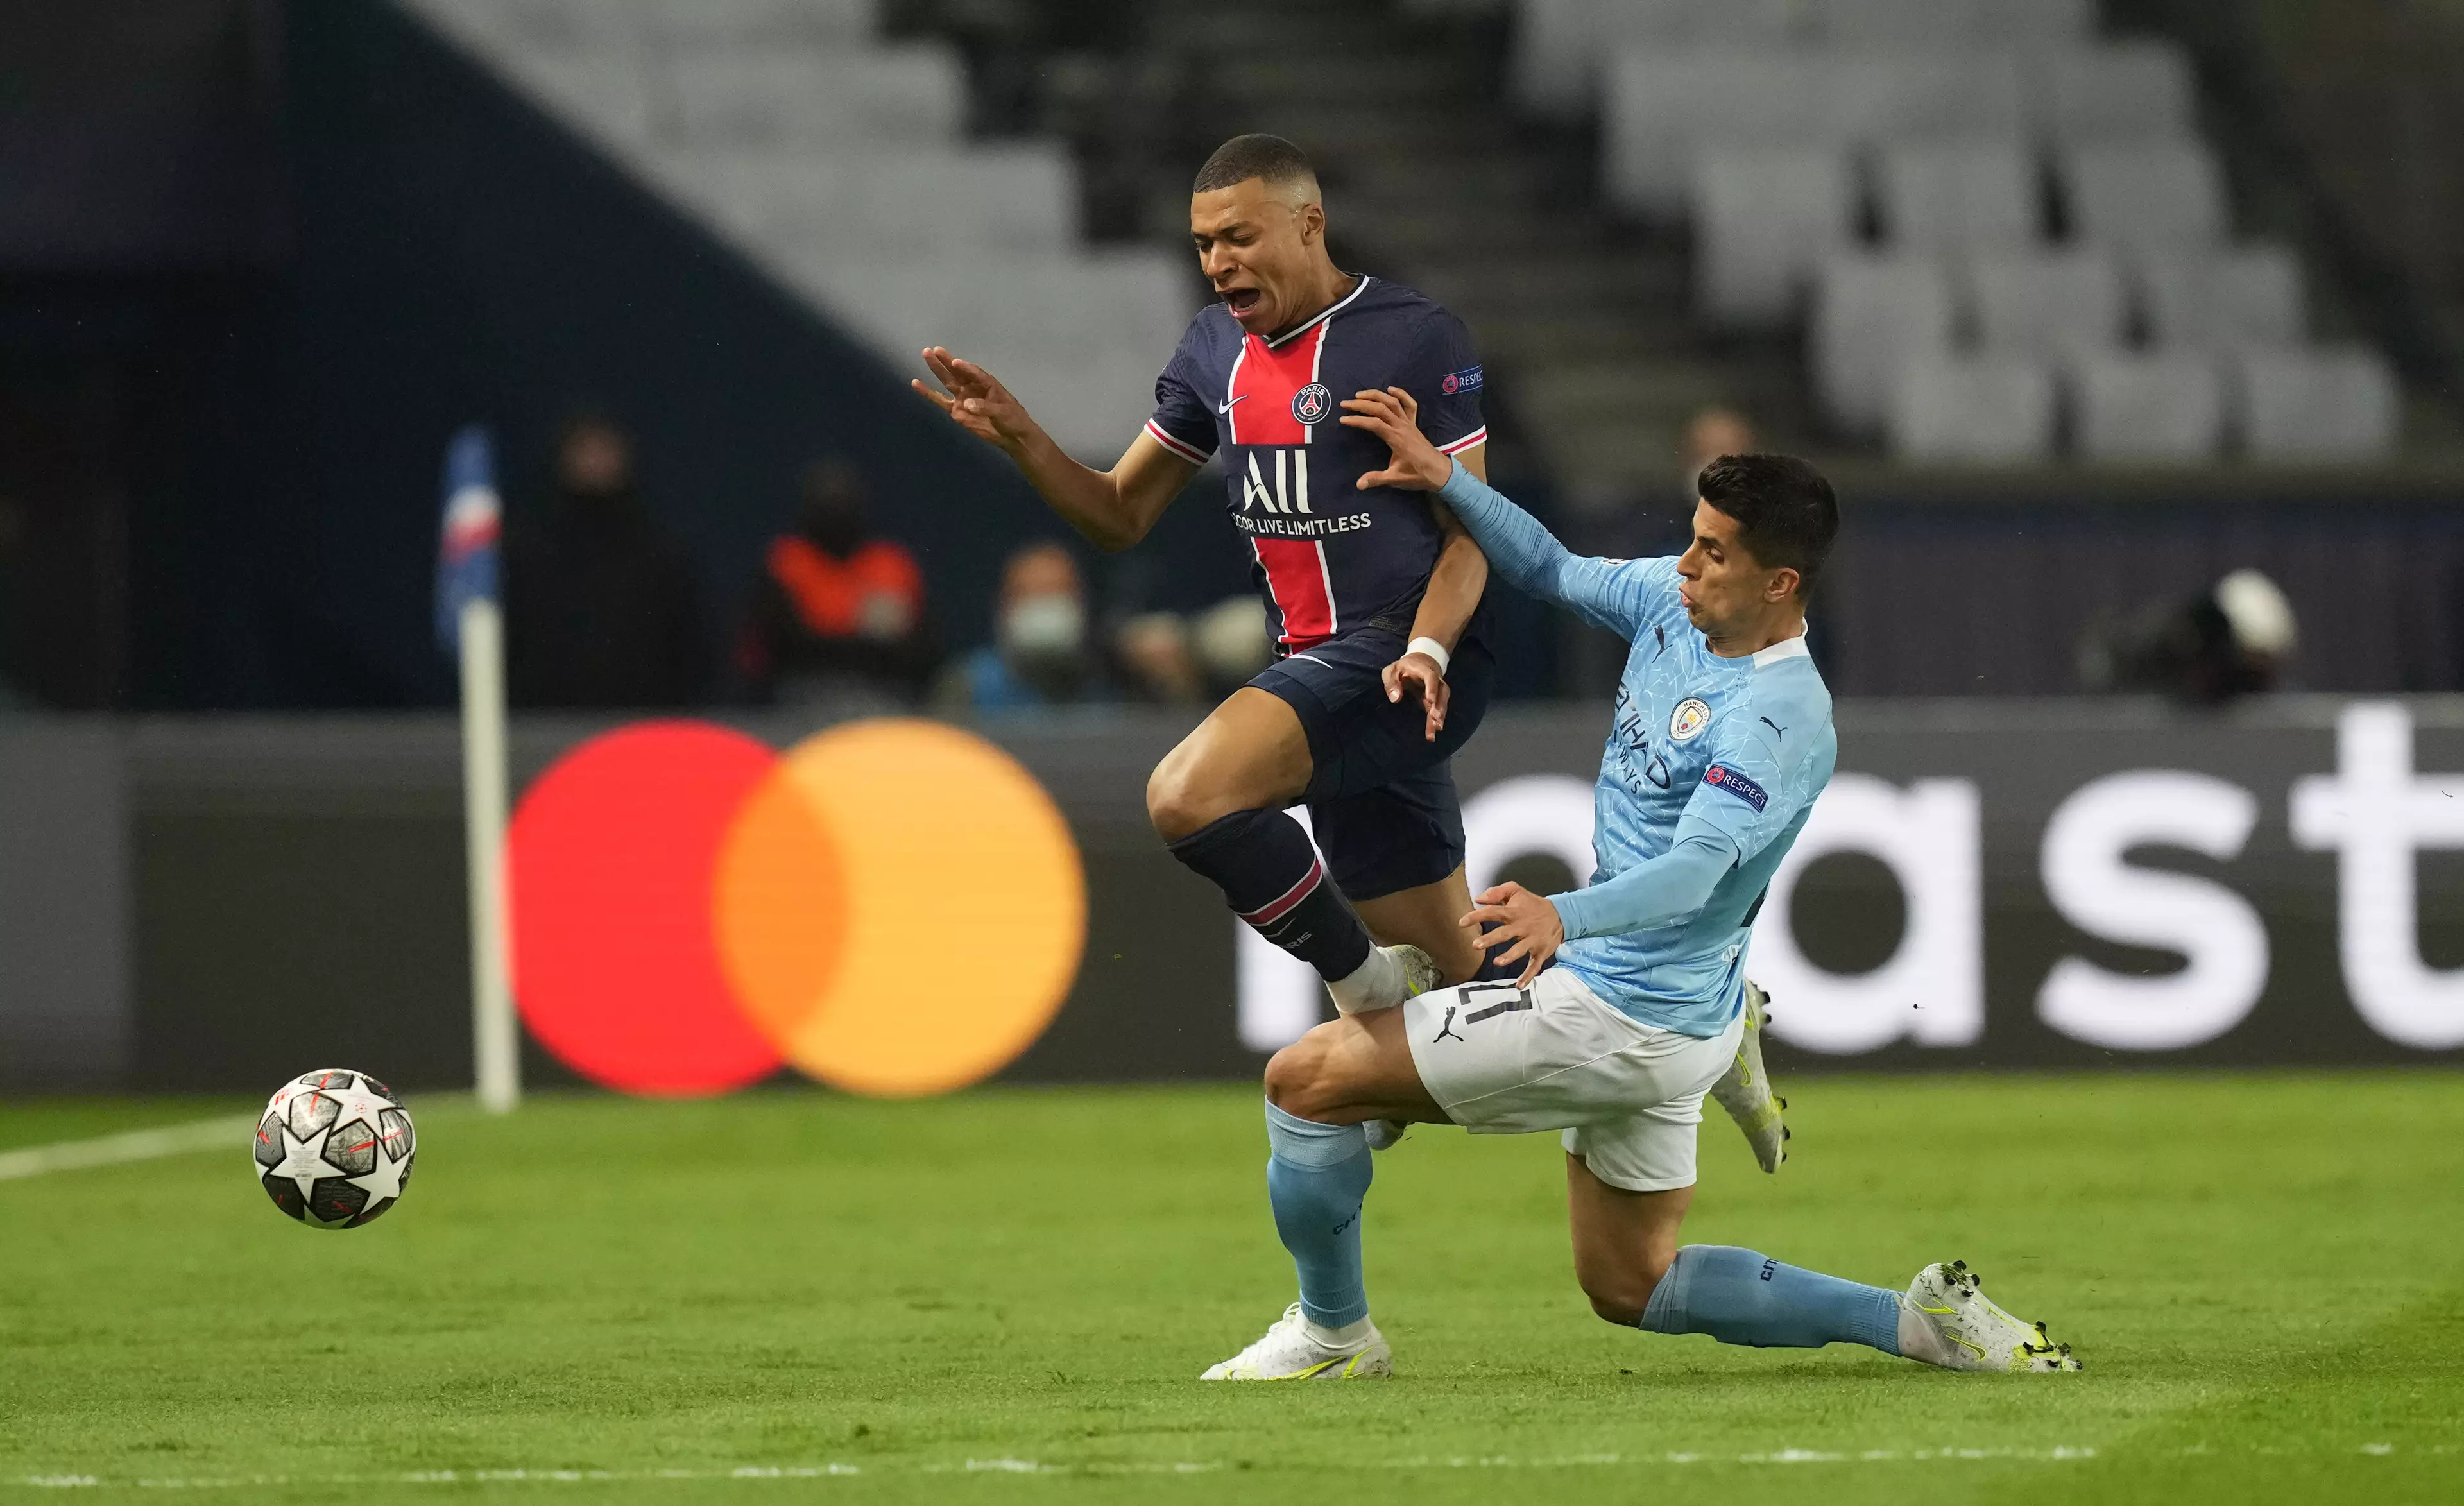 PSG forward Kylian Mbappe is doubtful for the match